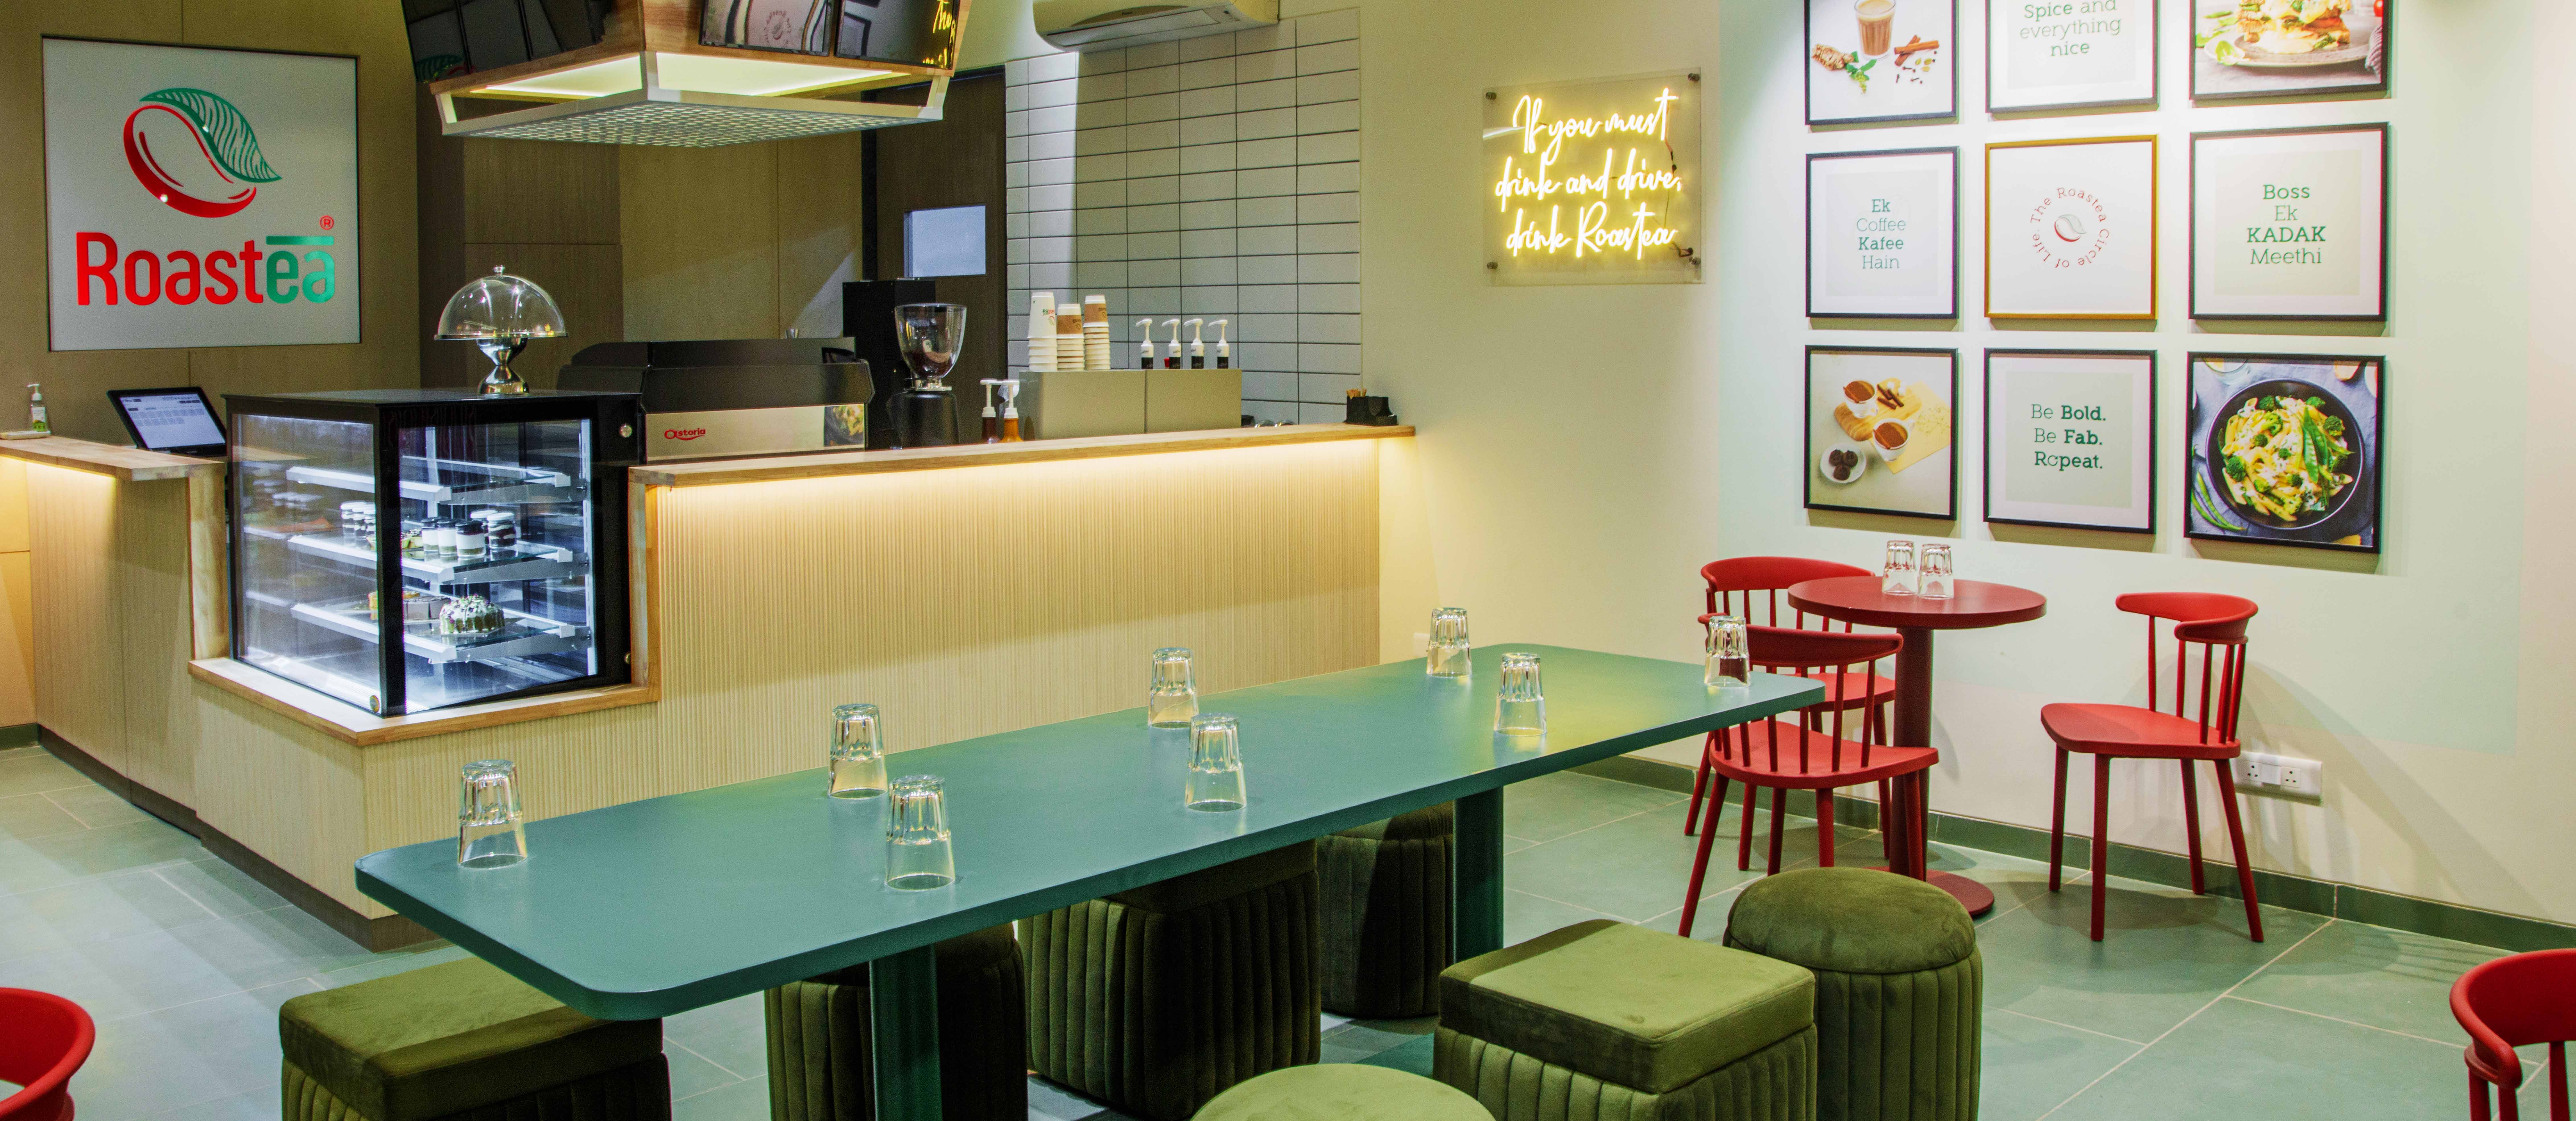 Corporate Café Experience: Have you pitched your start-up ideas at Roastea One42, Ahmedabad